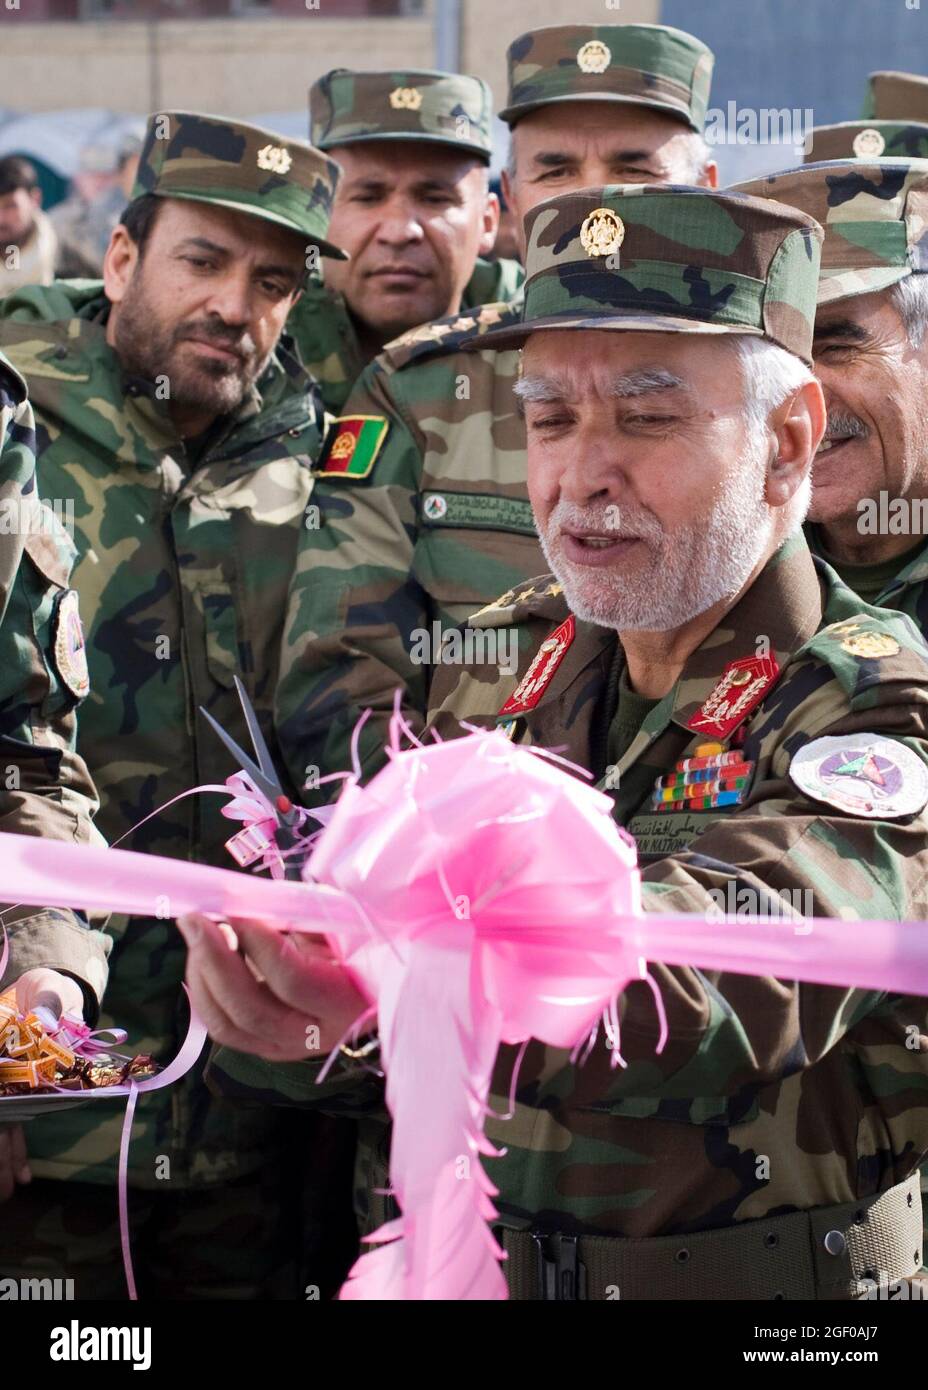 KABUL, Afghanistan (Feb. 9, 2011) - Maj. Gen. Shir Zazai, Commandant for the Afghan National Army National Military Academy of Afghanistan, prepares to cut a ribbon to officially open a new building at the academy Feb. 9, 2011 in Kabul, Afghanistan. The ribbon cutting celebrates the opening of a new building containing 32 classrooms and a library as well as increasing student capacity by more than 300. NATO Training Mission-Afghanistan advisers provide guidance to Afghan National Army instructors charged with conducting the bulk of training at the academy. (U.S. Navy photo by Petty Officer 2nd Stock Photo